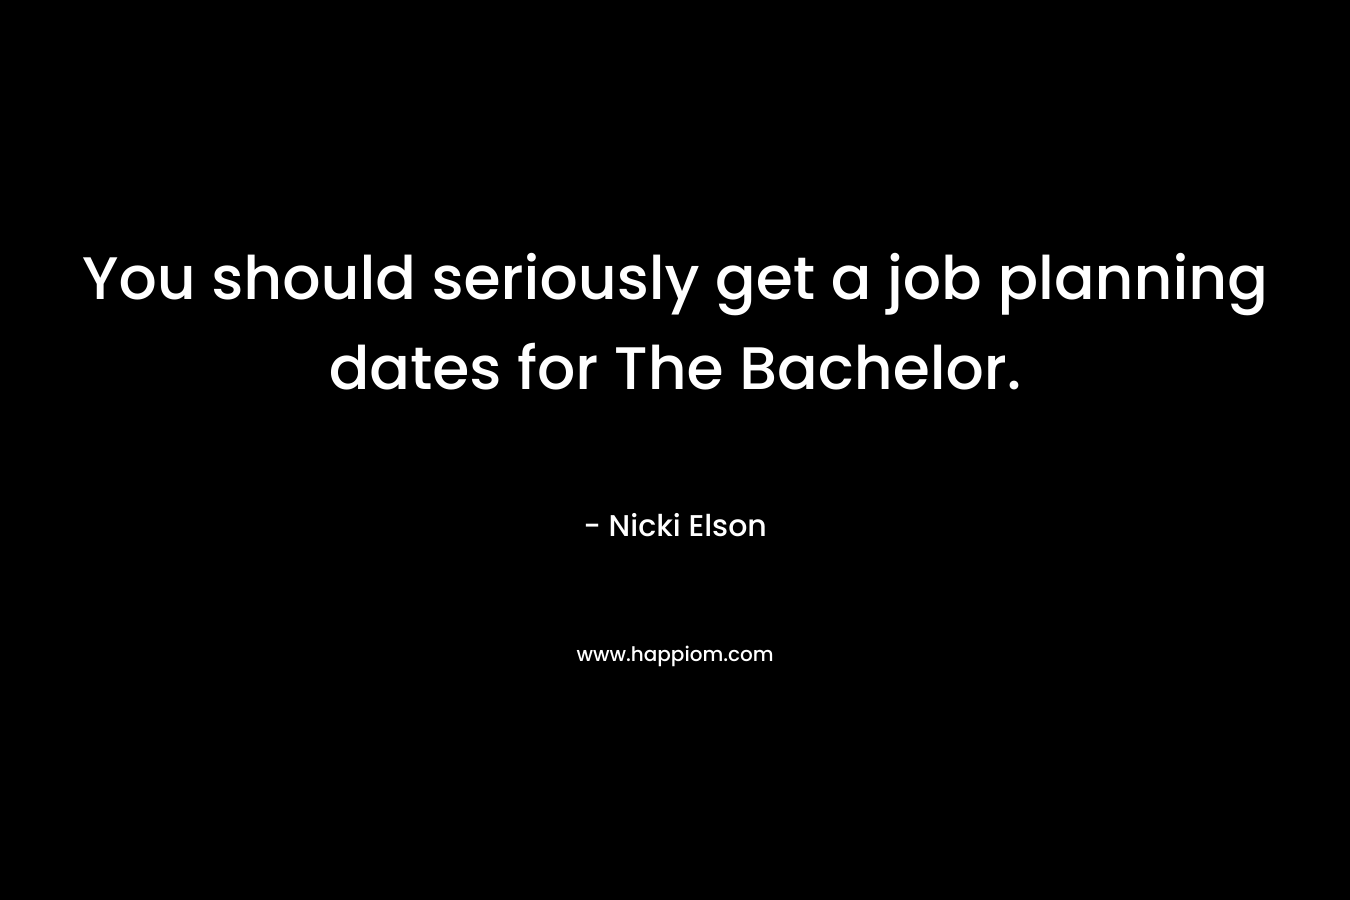 You should seriously get a job planning dates for The Bachelor.